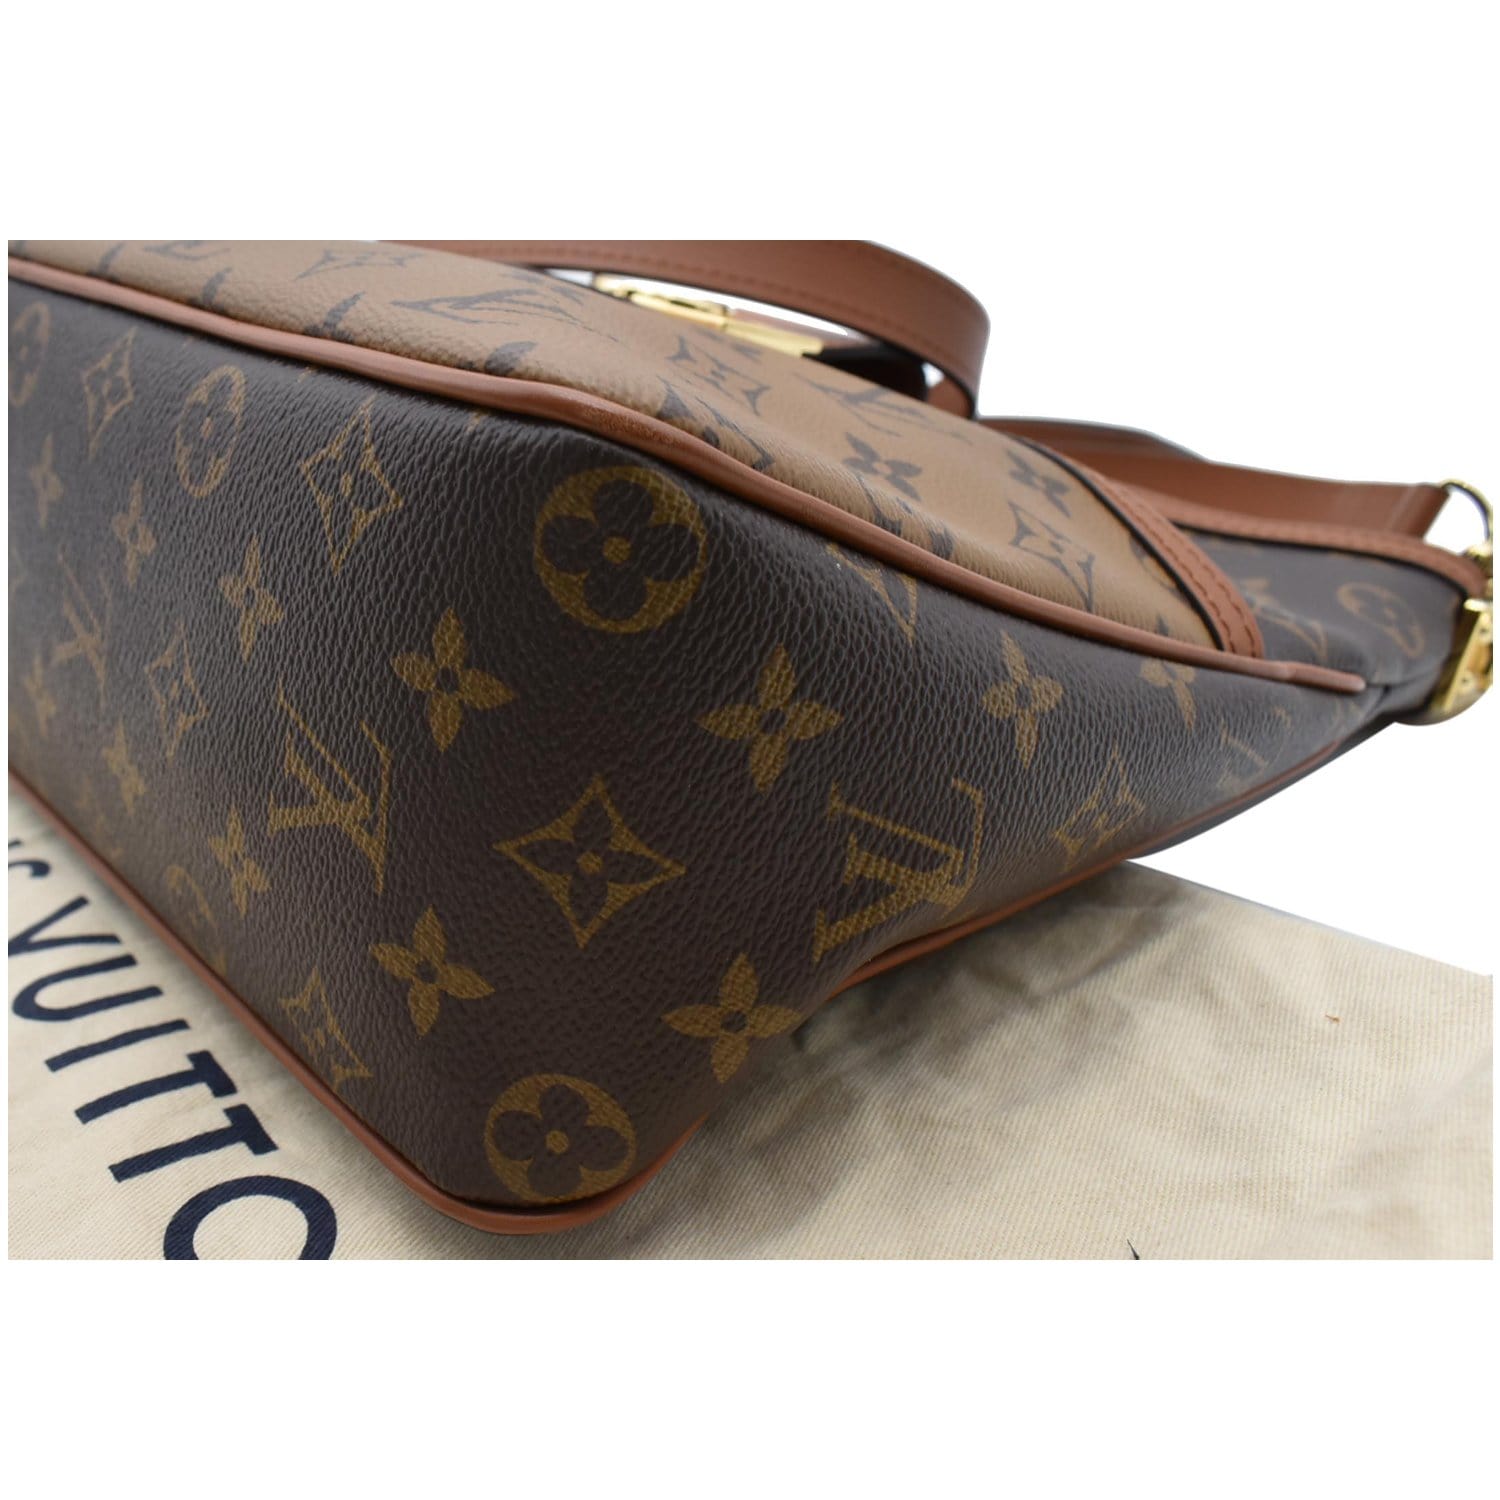 Louis Vuitton Dauphine Bag Reference Guide - Spotted Fashion